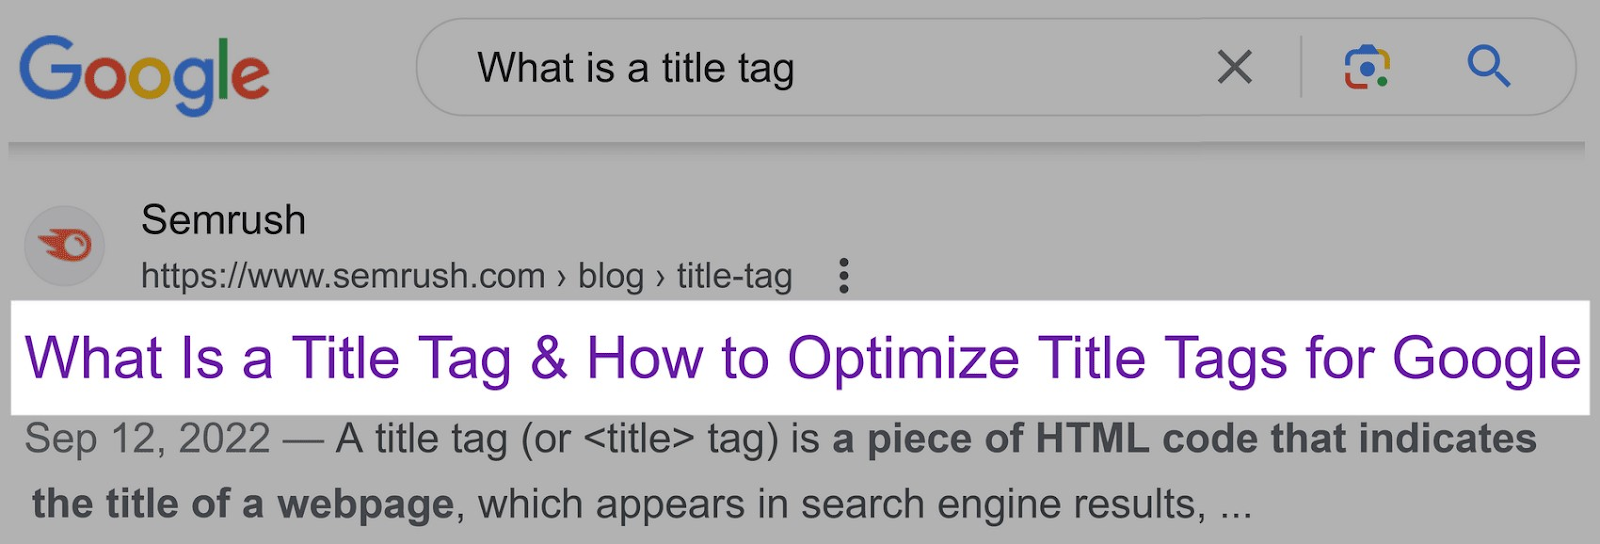 An example of an title tag on Google SERP